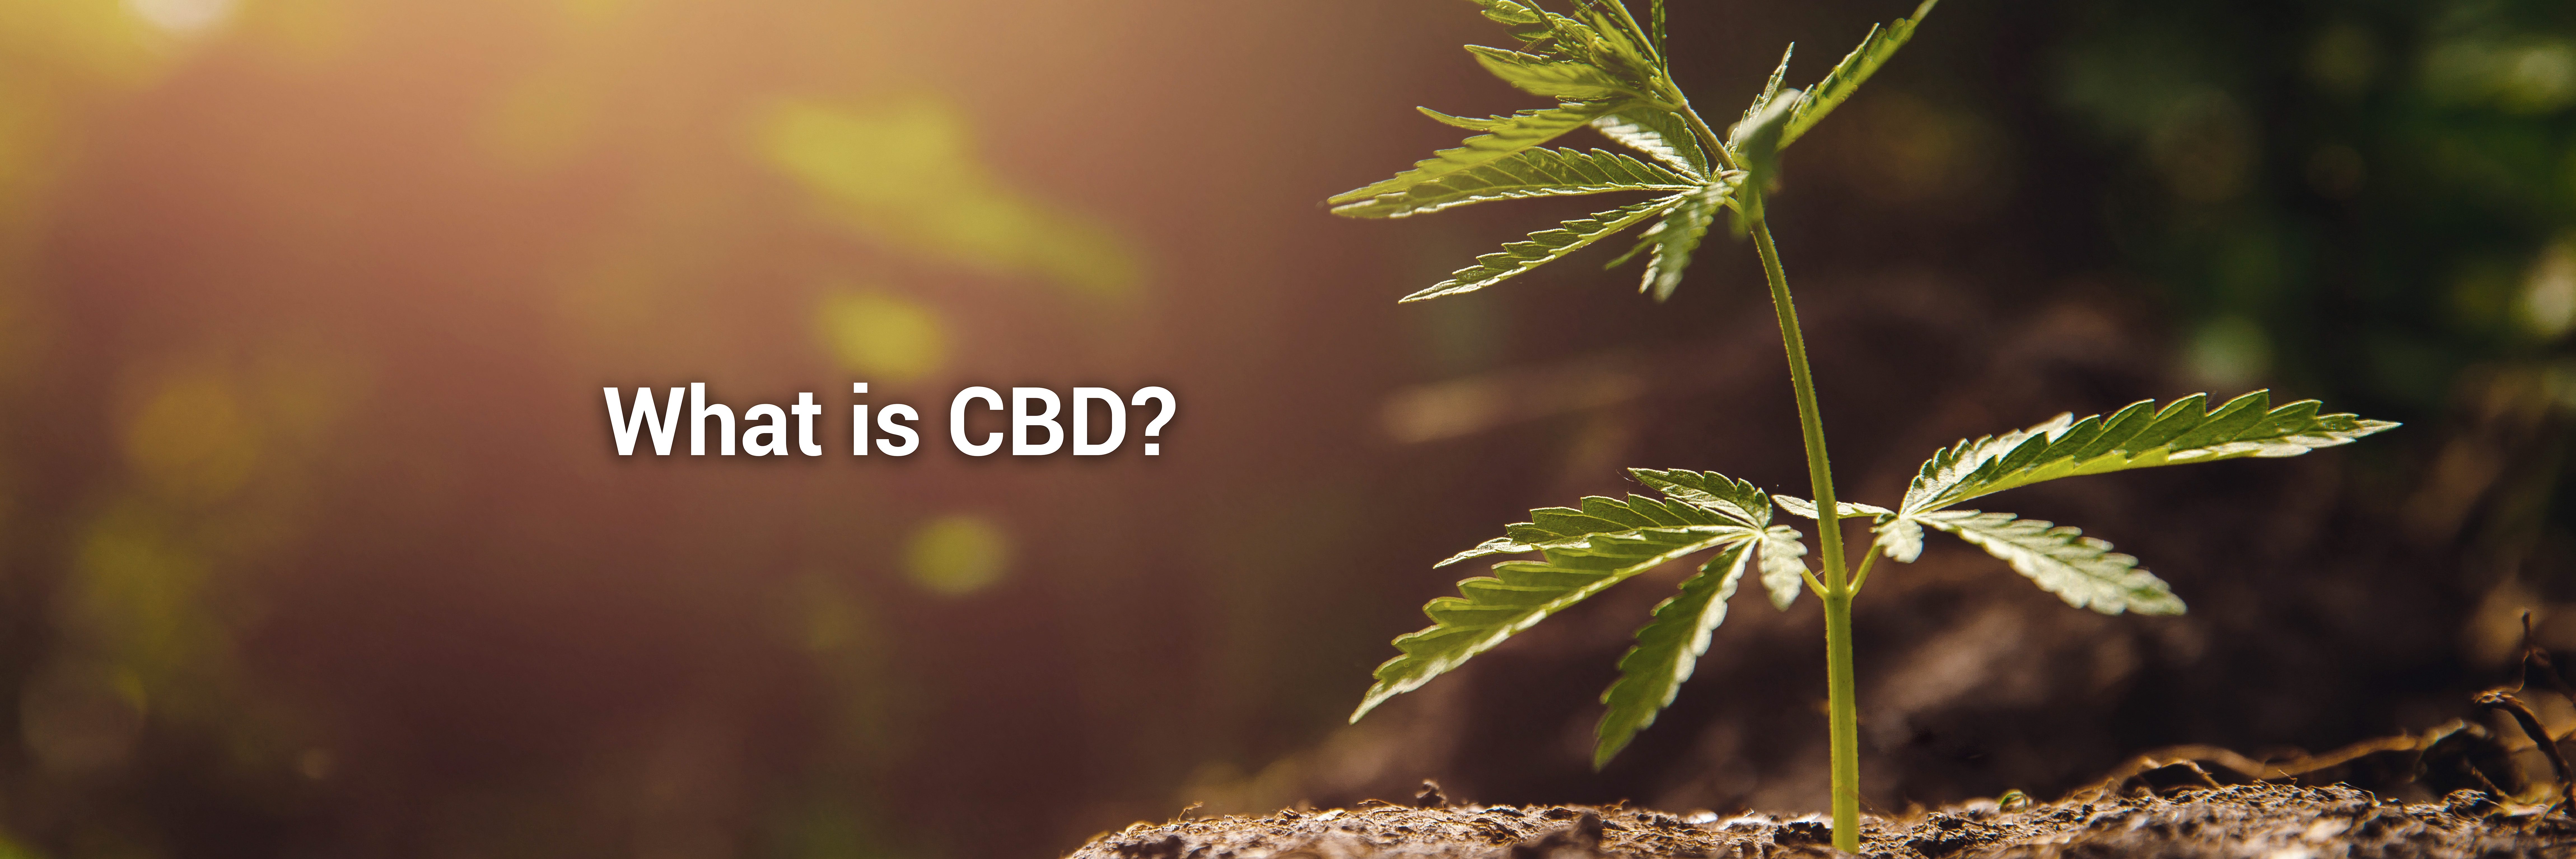 An image asking the question What is CBD?